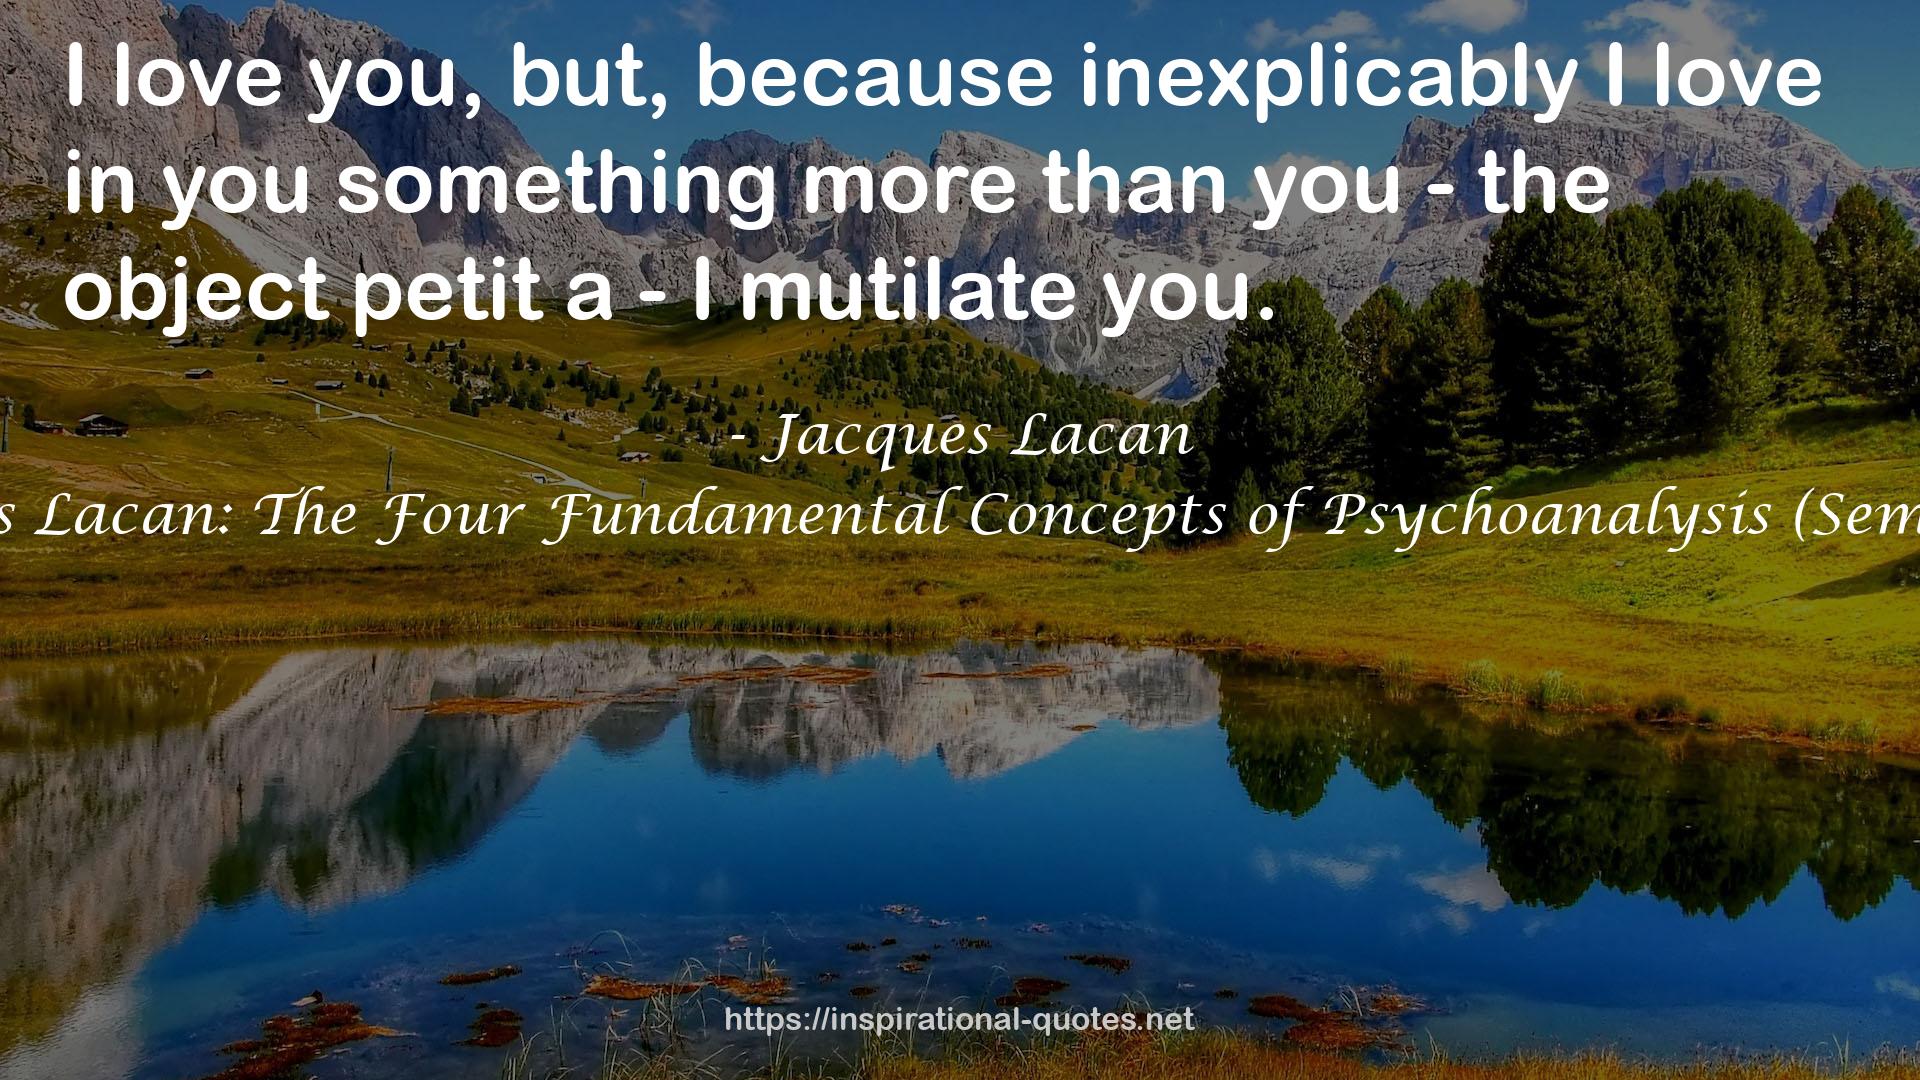 Jacques Lacan QUOTES